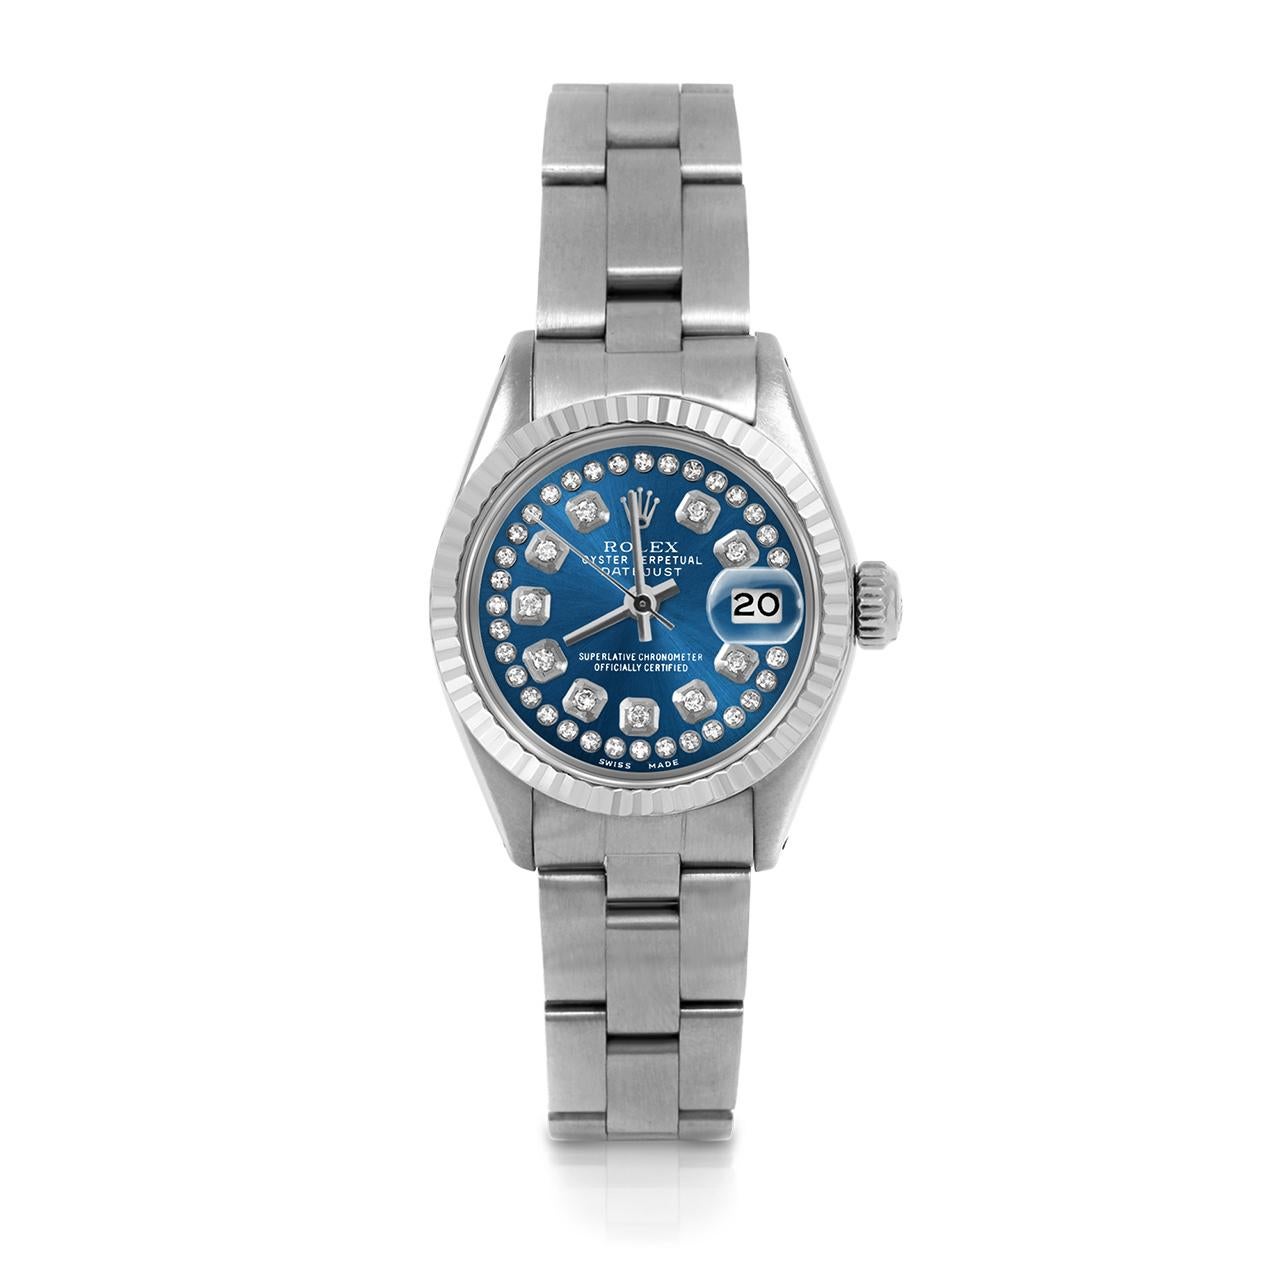 Pre-Owned Rolex 6917 Ladies 26mm Datejust Watch, Custom Blue String Diamond Dial & Fluted Bezel on Rolex Stainless Steel Oyster Band.   

SKU 6917-SS-BLU-STRD-FLT-OYS


Brand/Model:        Rolex Datejust
Model Number:        6917
Style:       